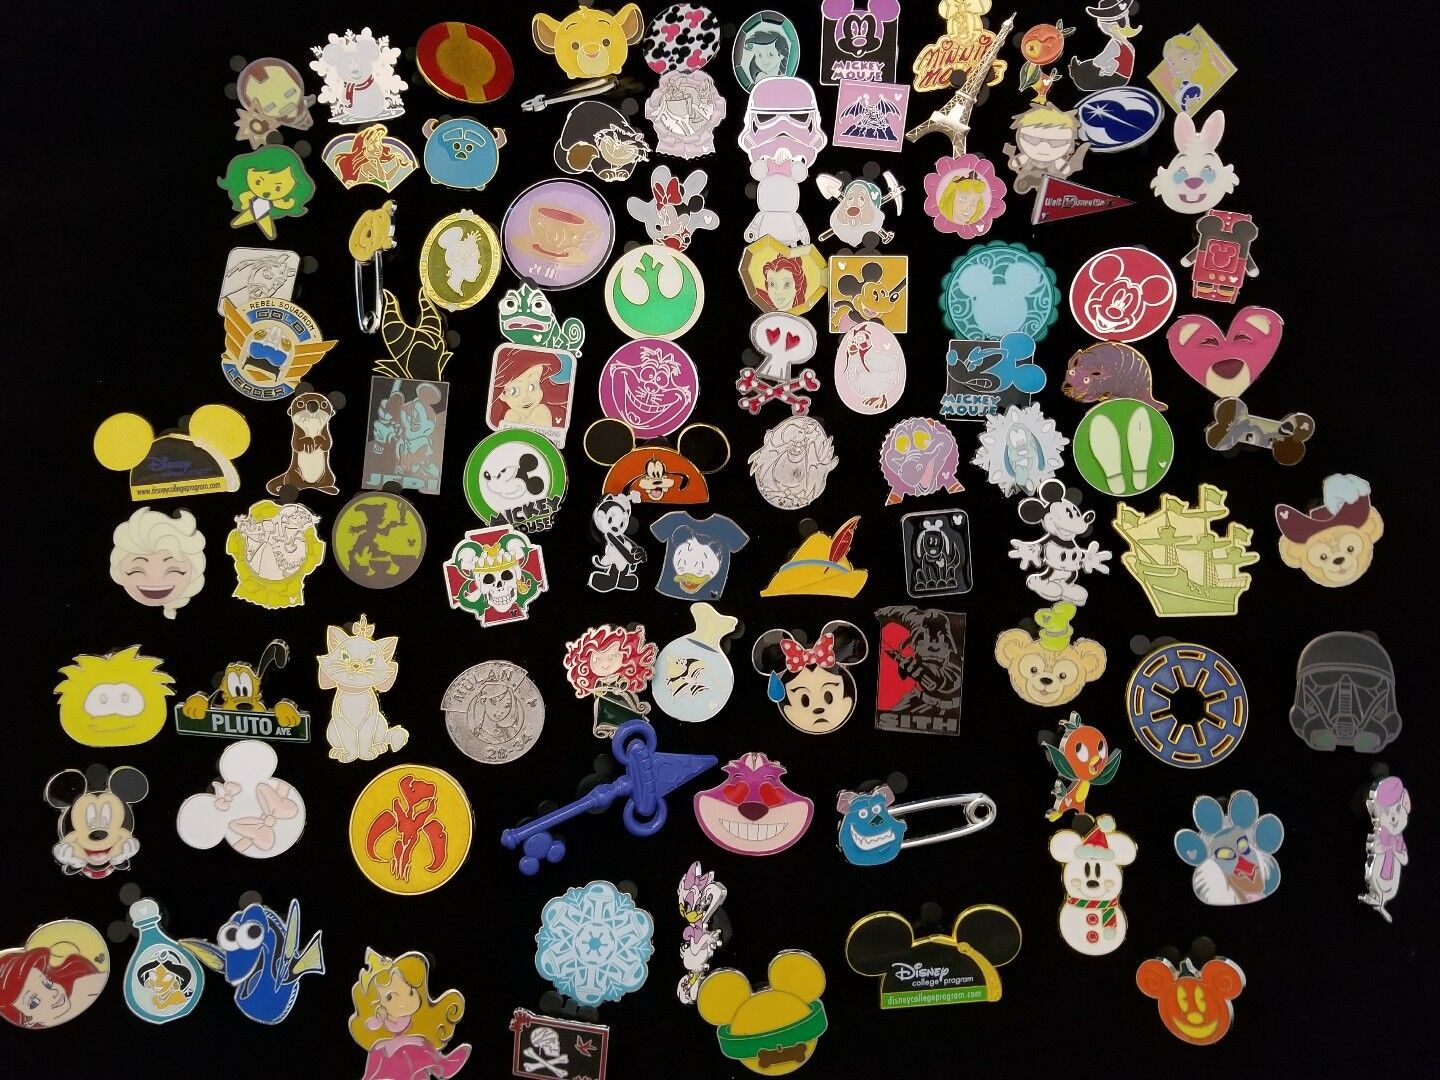 Disney Trading Pins lot of 200 1-3 Day Shipping 100% tradable